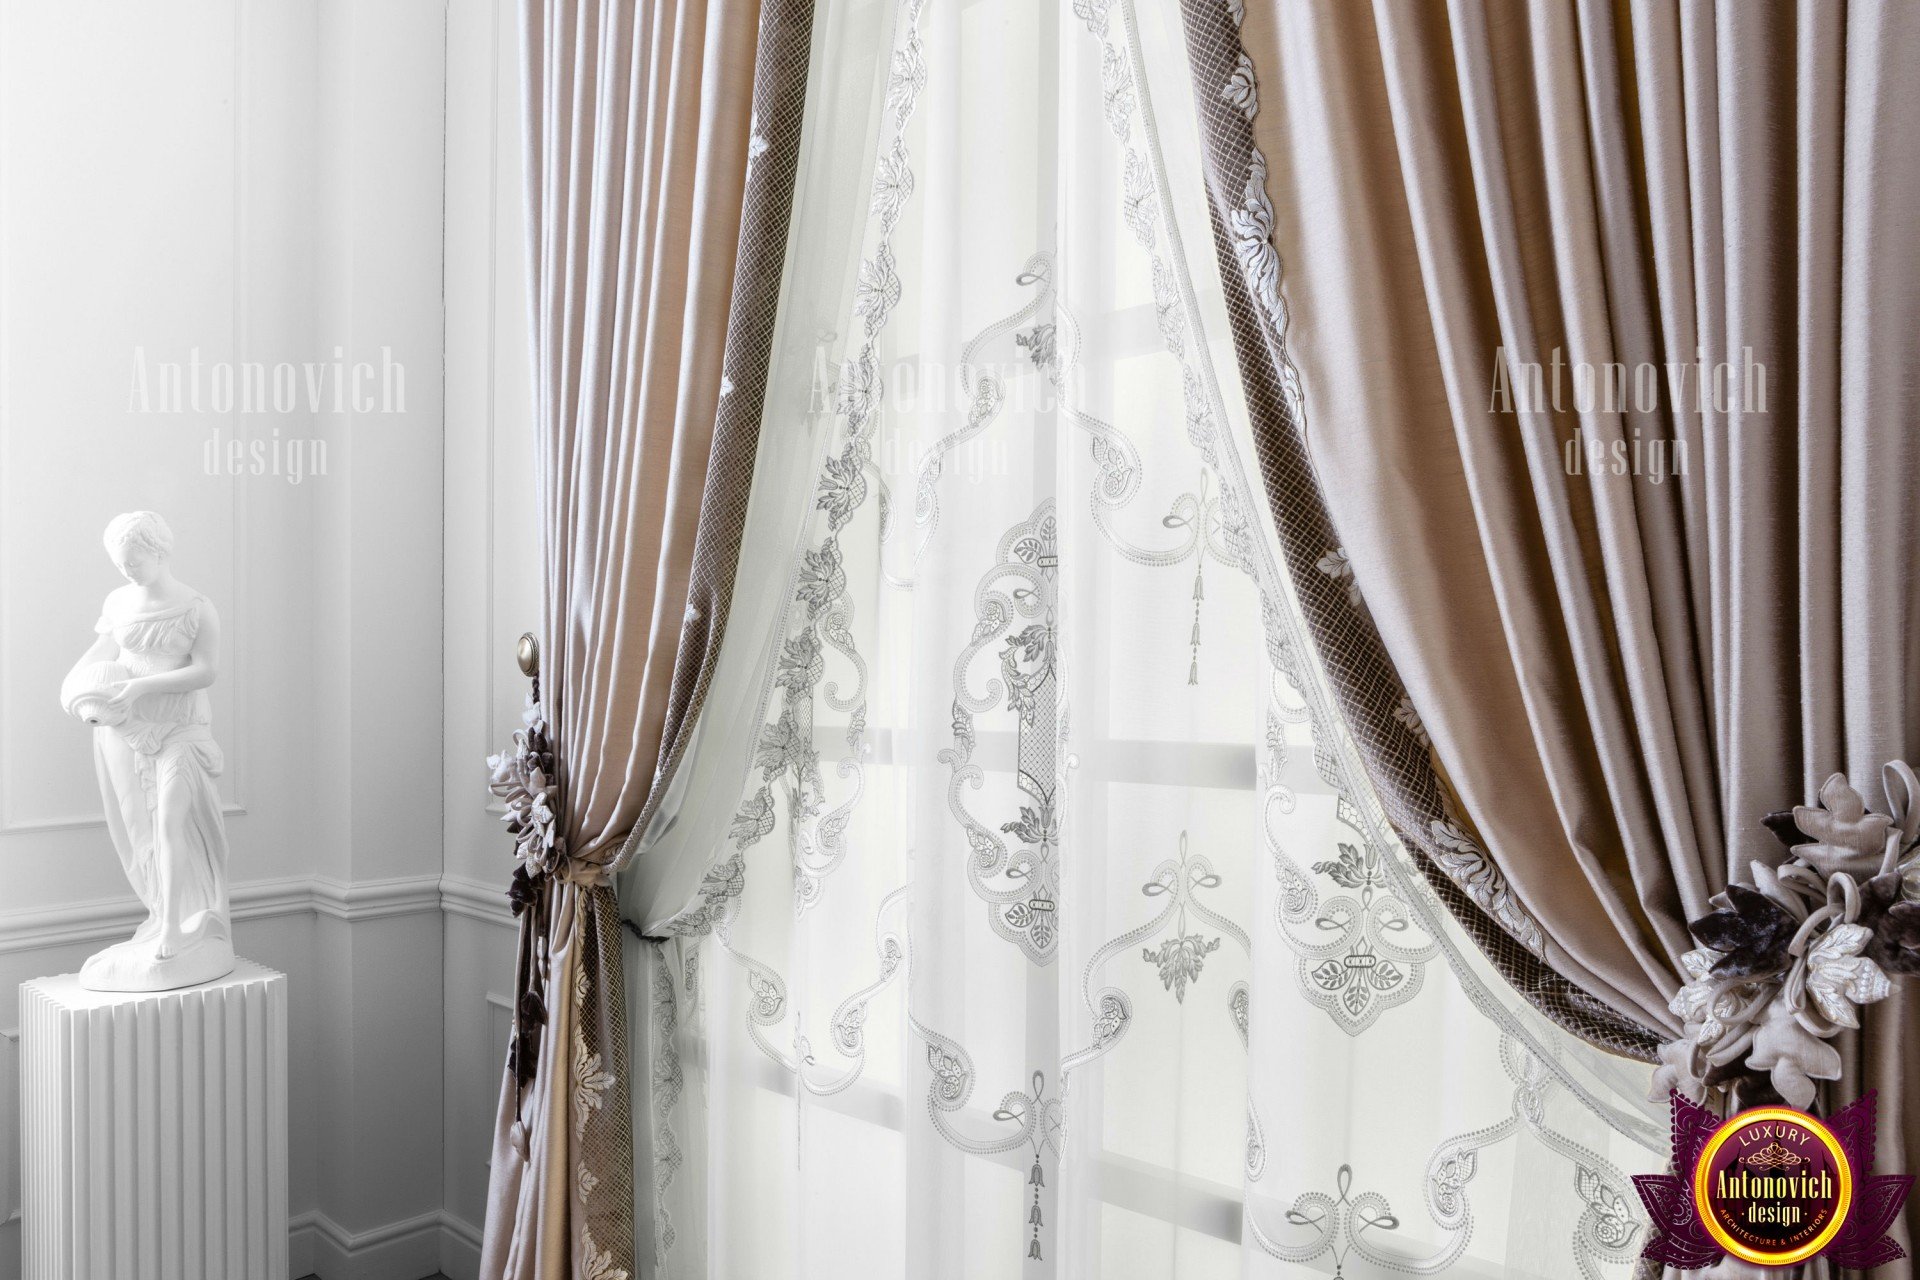 Revolutionize Your Home With These Creative Curtain Designs